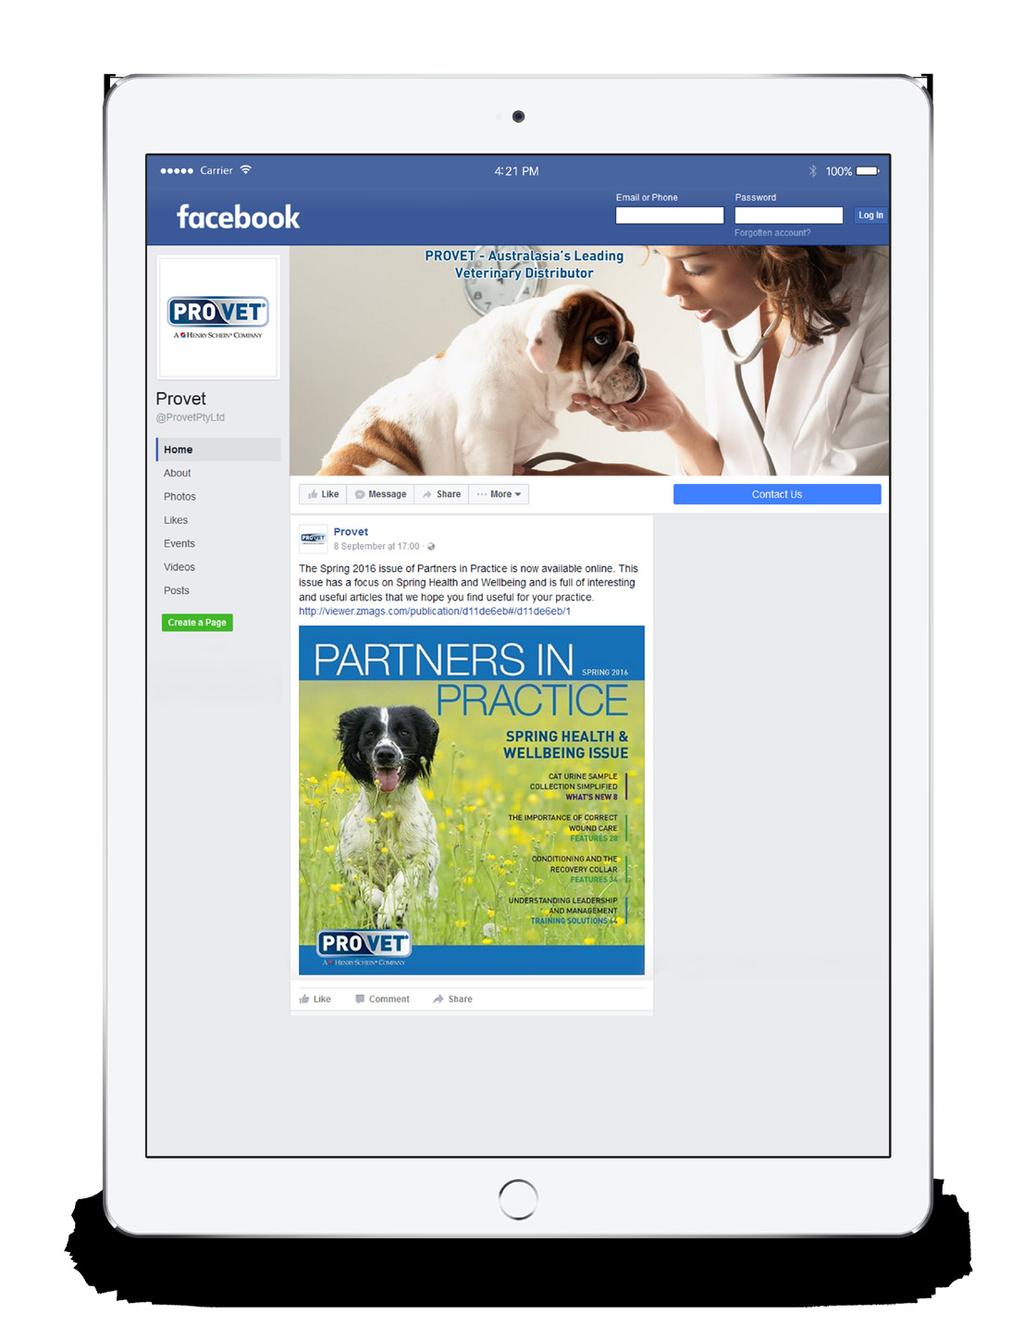 ONLINE ADVERTISING FACEBOOK Facebook offers a targeted audience of industry contacts that have chosen to follow the Provet page and interact with our posts.